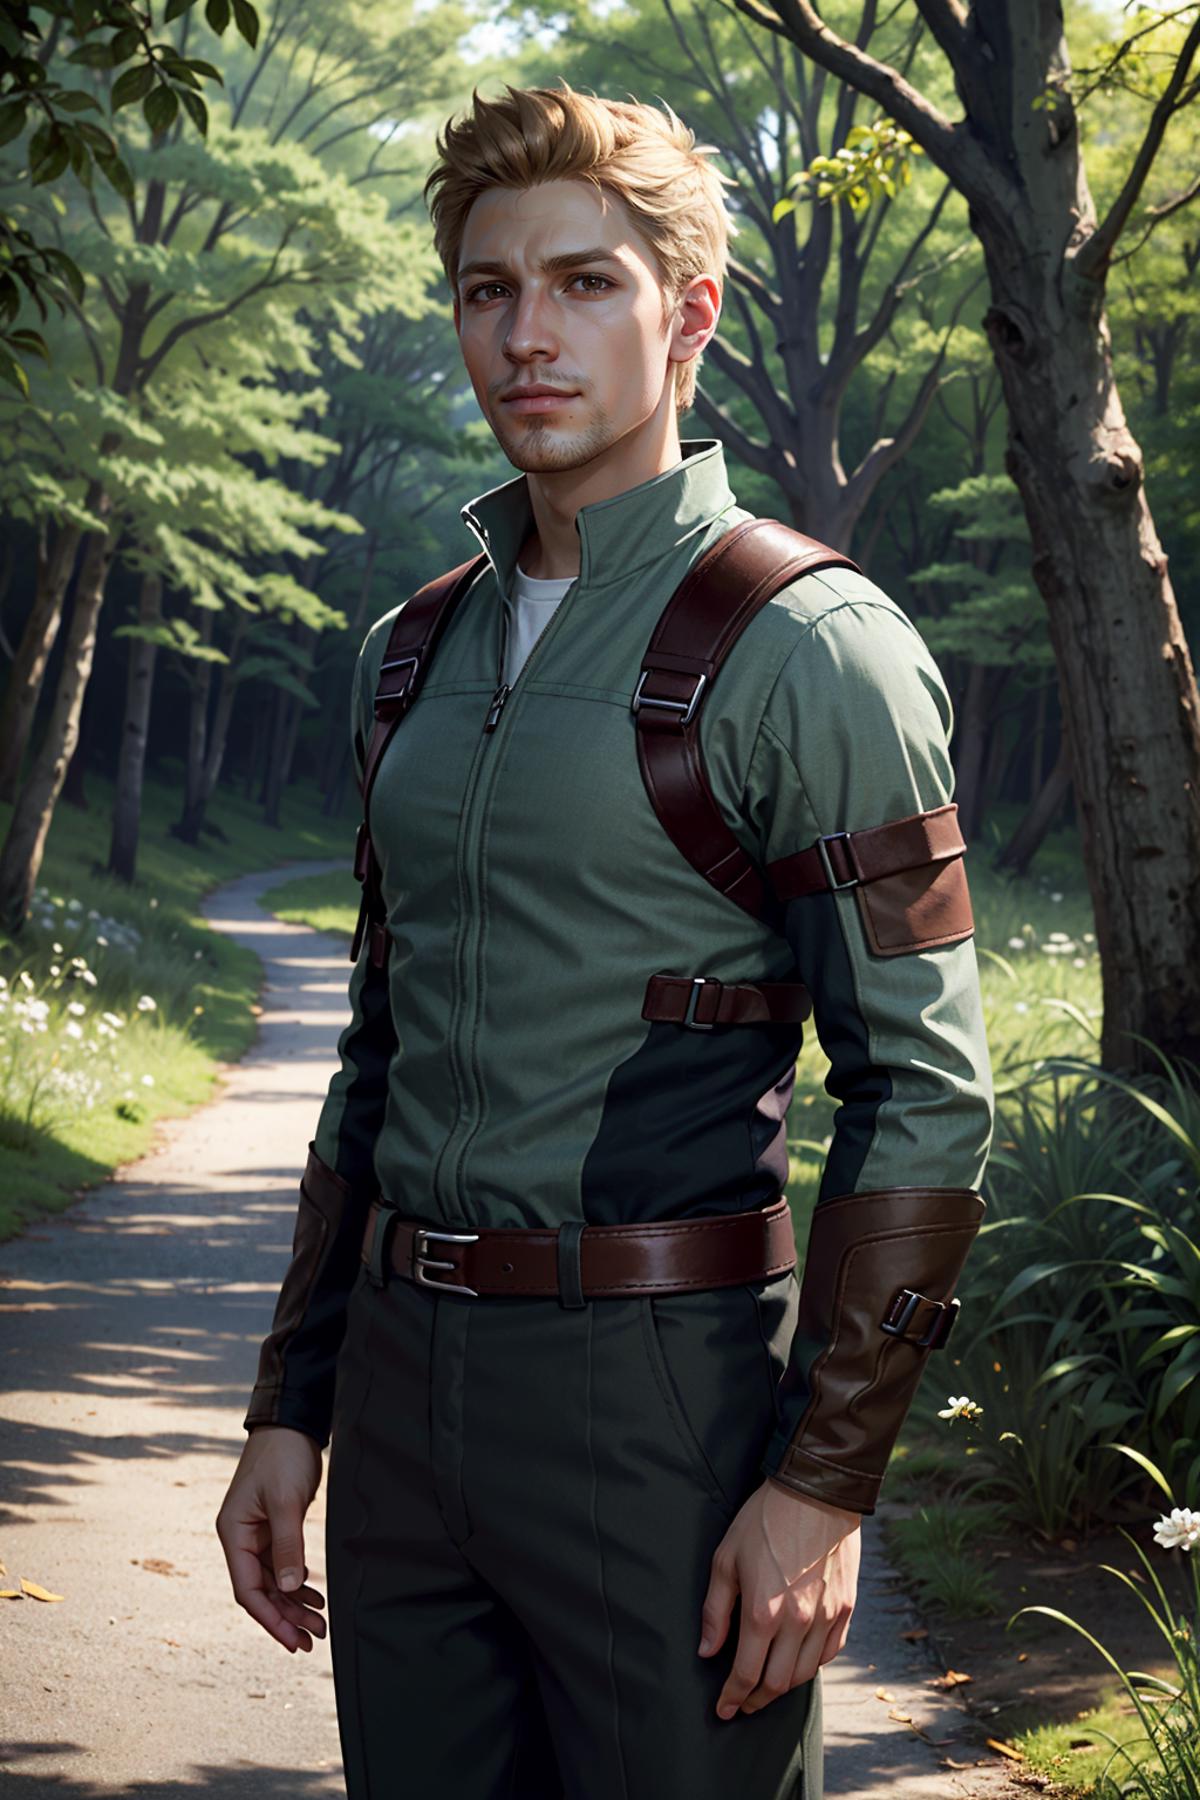 Alistair from Dragon Age image by BloodRedKittie